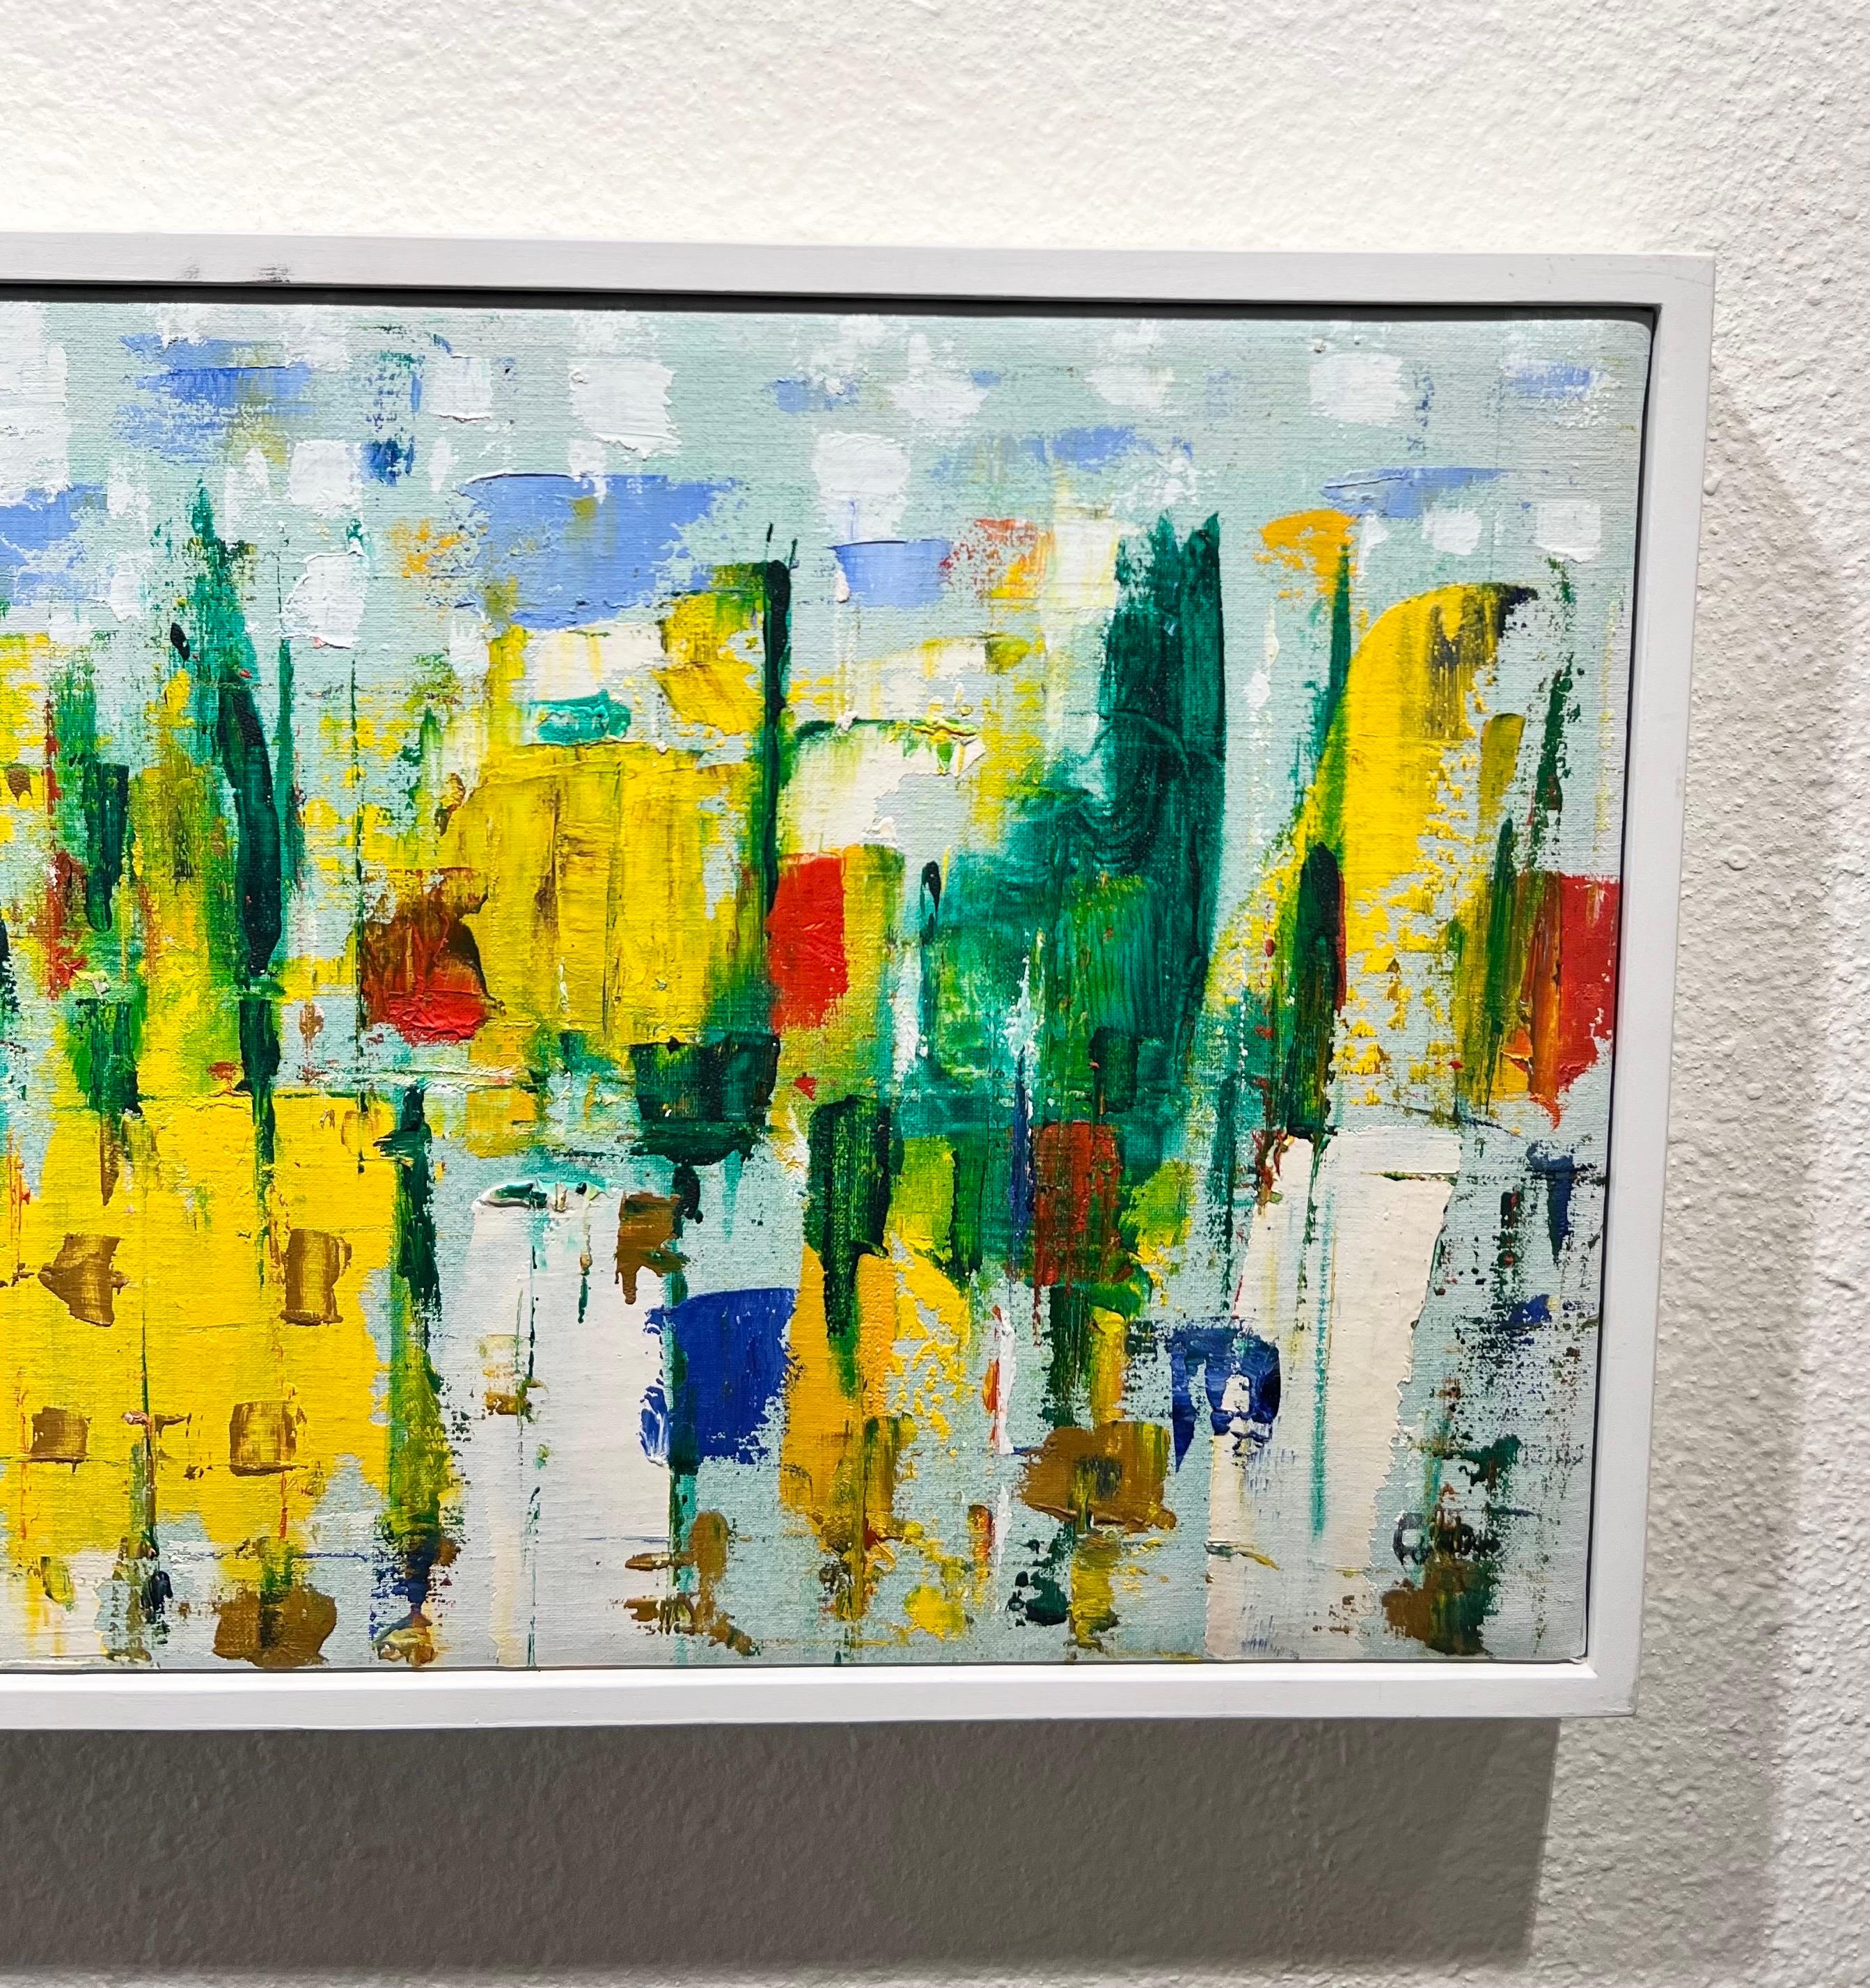 In 'Overlook Mountain, Woodstock, 1974,' Pinajian created a colorful and abstract representation of the Woodstock mountains using oil painting techniques. This work is one of his early pieces and showcases his artistic talent. The oil painting size